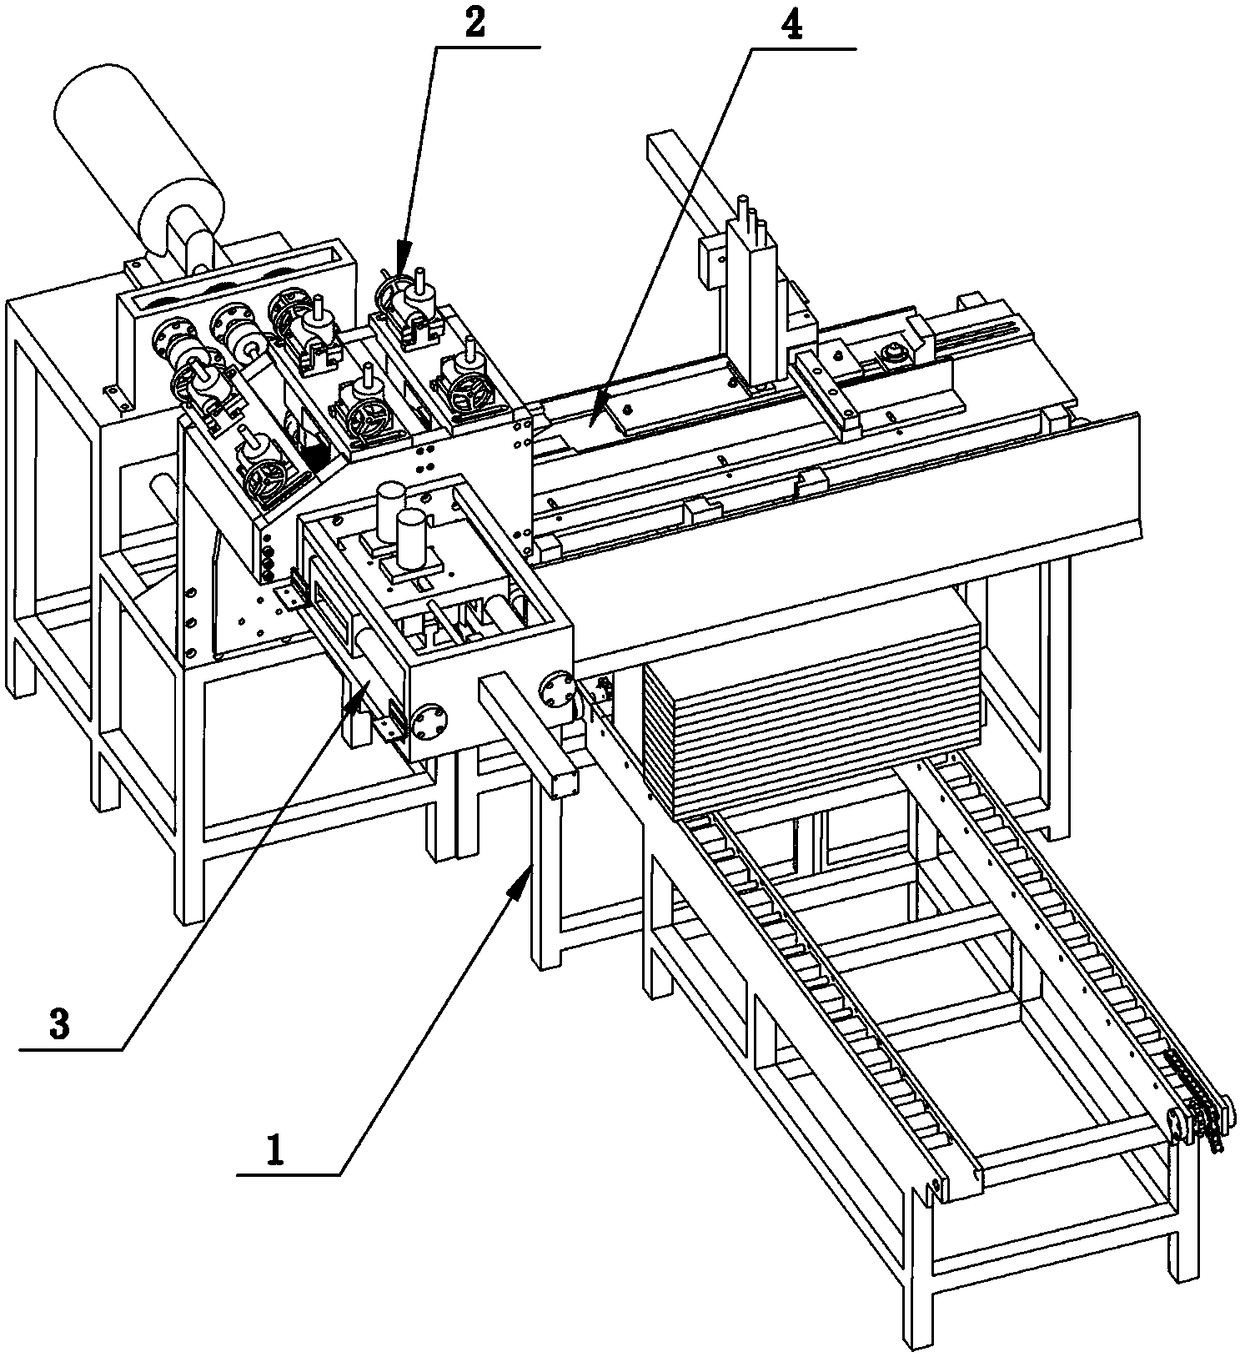 A fully automatic rim rolling and flattening machine